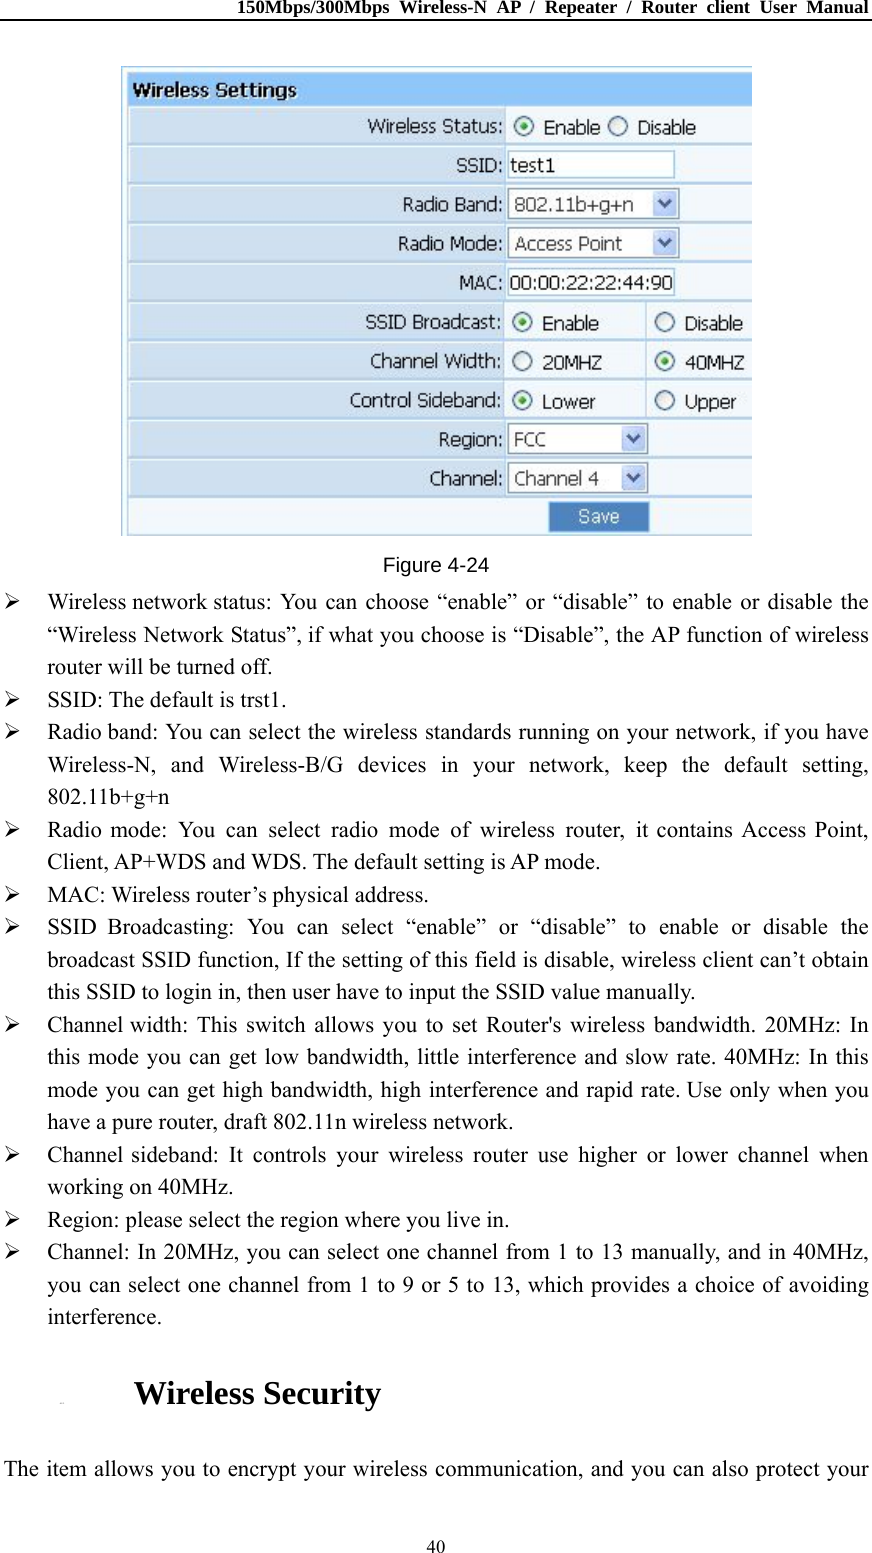 150Mbps/300Mbps Wireless-N AP / Repeater / Router client User Manual  40 Figure 4-24  Wireless network status: You can choose “enable” or “disable” to enable or disable the “Wireless Network Status”, if what you choose is “Disable”, the AP function of wireless router will be turned off.  SSID: The default is trst1.  Radio band: You can select the wireless standards running on your network, if you have Wireless-N, and Wireless-B/G devices in your network, keep the default setting, 802.11b+g+n  Radio mode: You can select radio mode of wireless router, it contains Access Point, Client, AP+WDS and WDS. The default setting is AP mode.  MAC: Wireless router’s physical address.  SSID Broadcasting: You can select “enable” or “disable” to enable or disable the broadcast SSID function, If the setting of this field is disable, wireless client can’t obtain this SSID to login in, then user have to input the SSID value manually.  Channel width: This switch allows you to set Router&apos;s wireless bandwidth. 20MHz: In this mode you can get low bandwidth, little interference and slow rate. 40MHz: In this mode you can get high bandwidth, high interference and rapid rate. Use only when you have a pure router, draft 802.11n wireless network.  Channel sideband: It controls your wireless router use higher or lower channel when working on 40MHz.  Region: please select the region where you live in.  Channel: In 20MHz, you can select one channel from 1 to 13 manually, and in 40MHz, you can select one channel from 1 to 9 or 5 to 13, which provides a choice of avoiding interference.  4.5.2. Wireless Security The item allows you to encrypt your wireless communication, and you can also protect your 